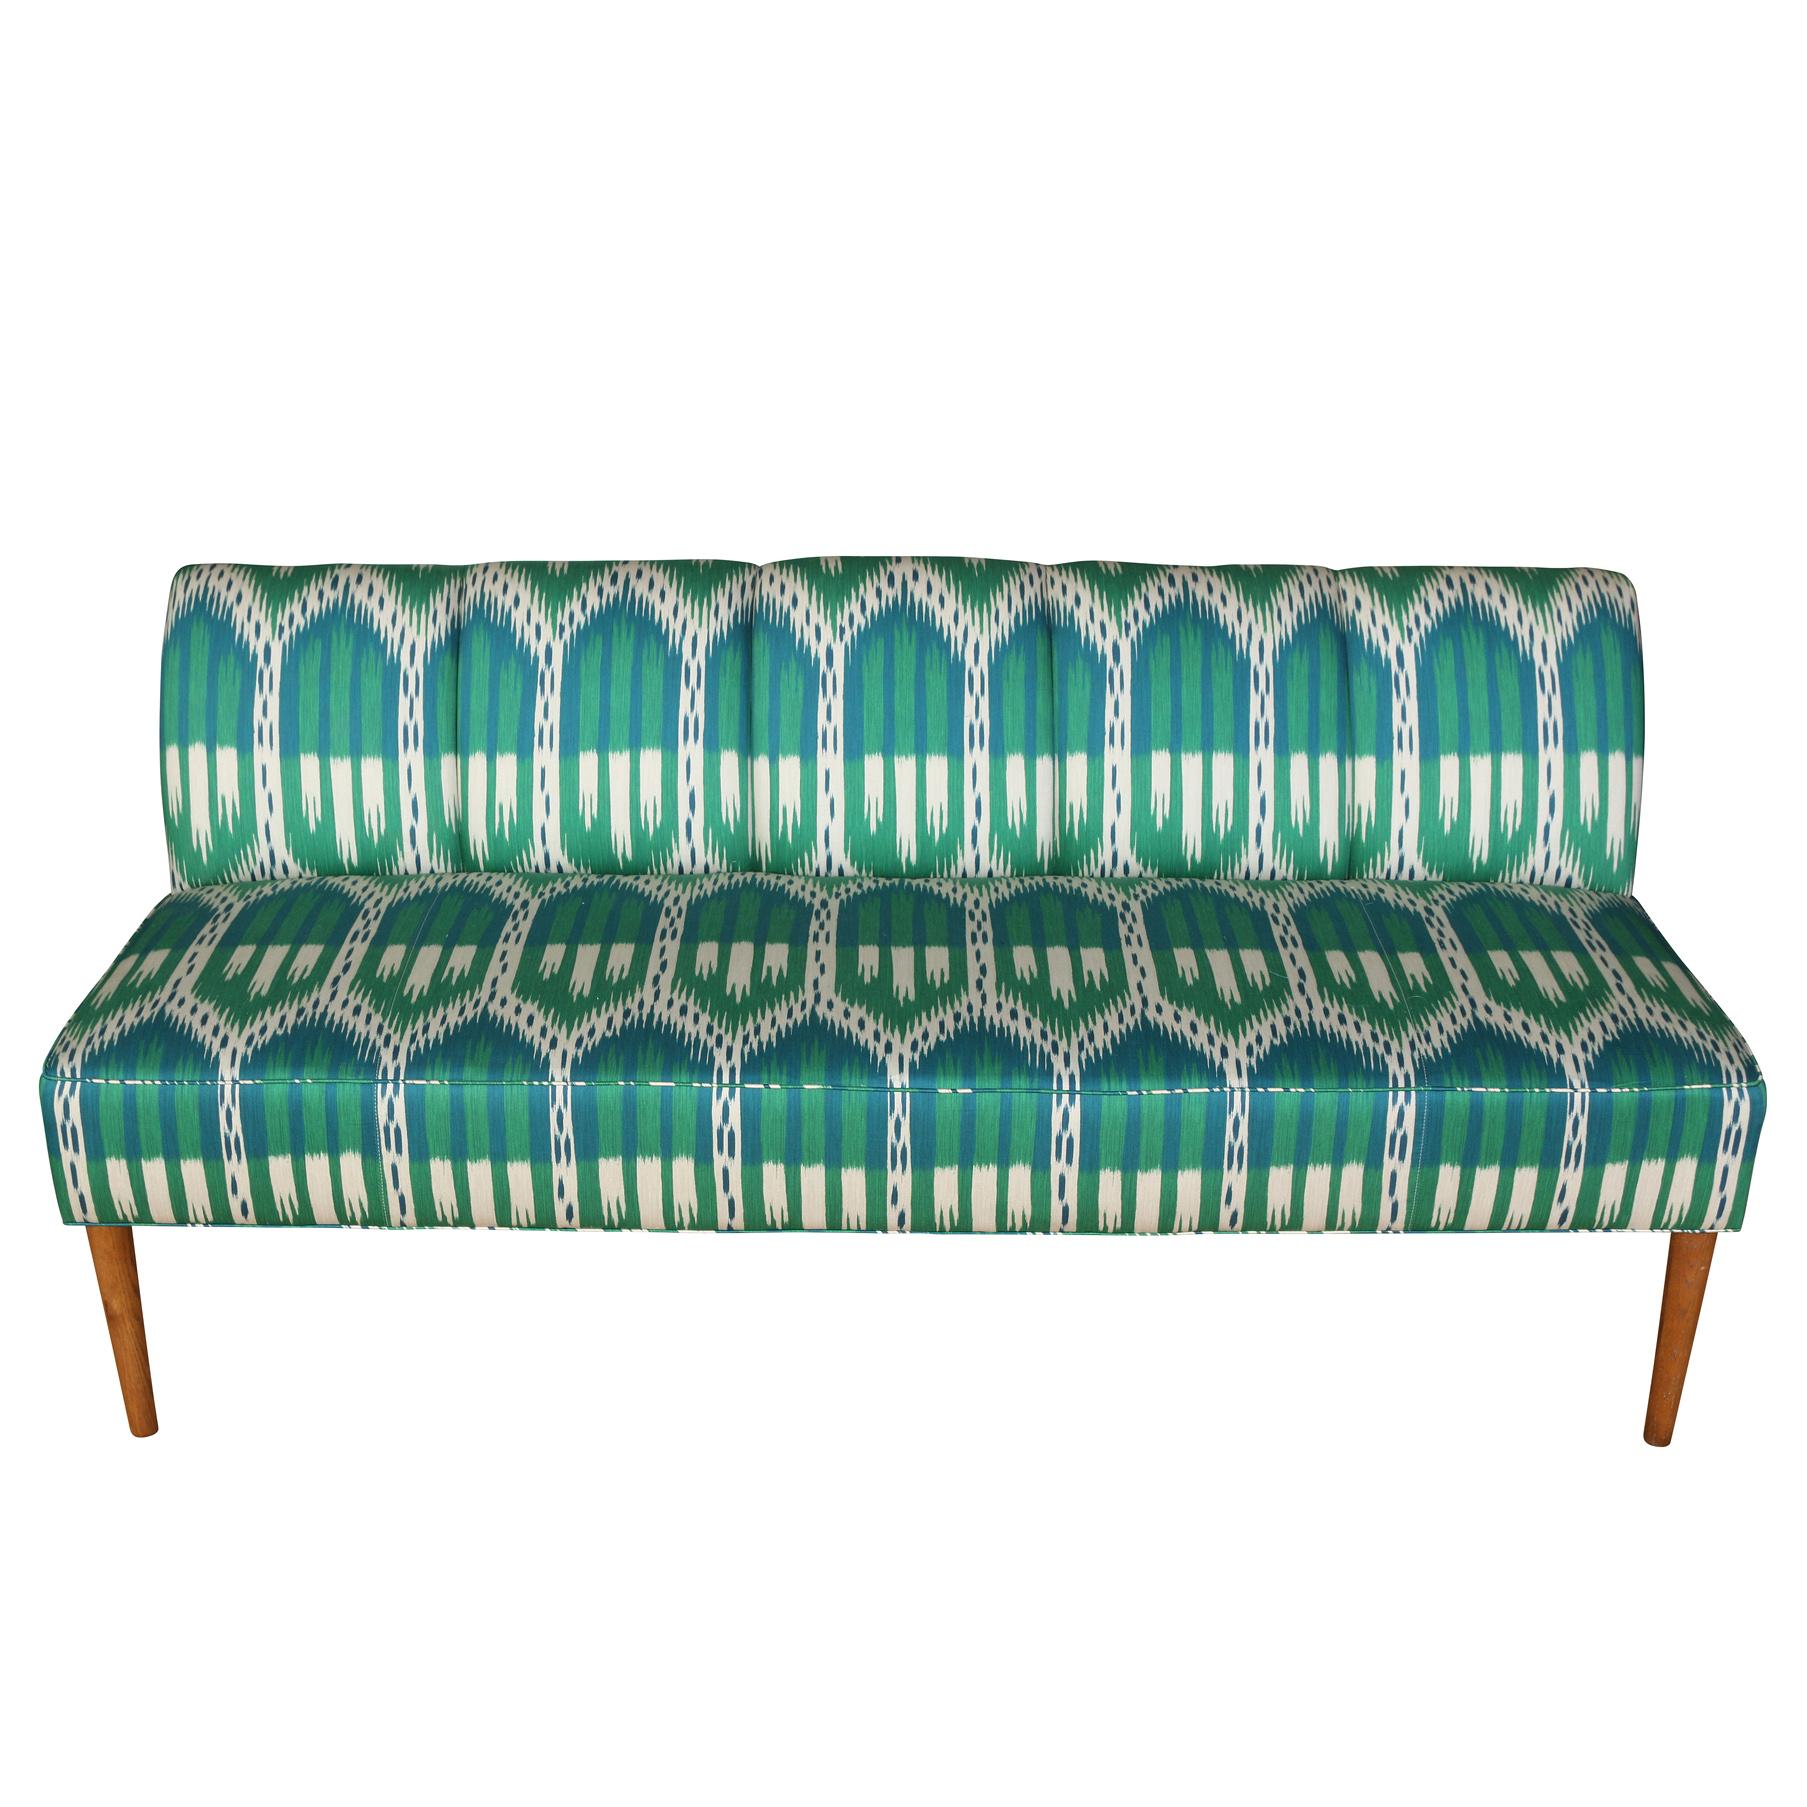 Contemporary Teal and Turquoise Ikat Banquette For Sale